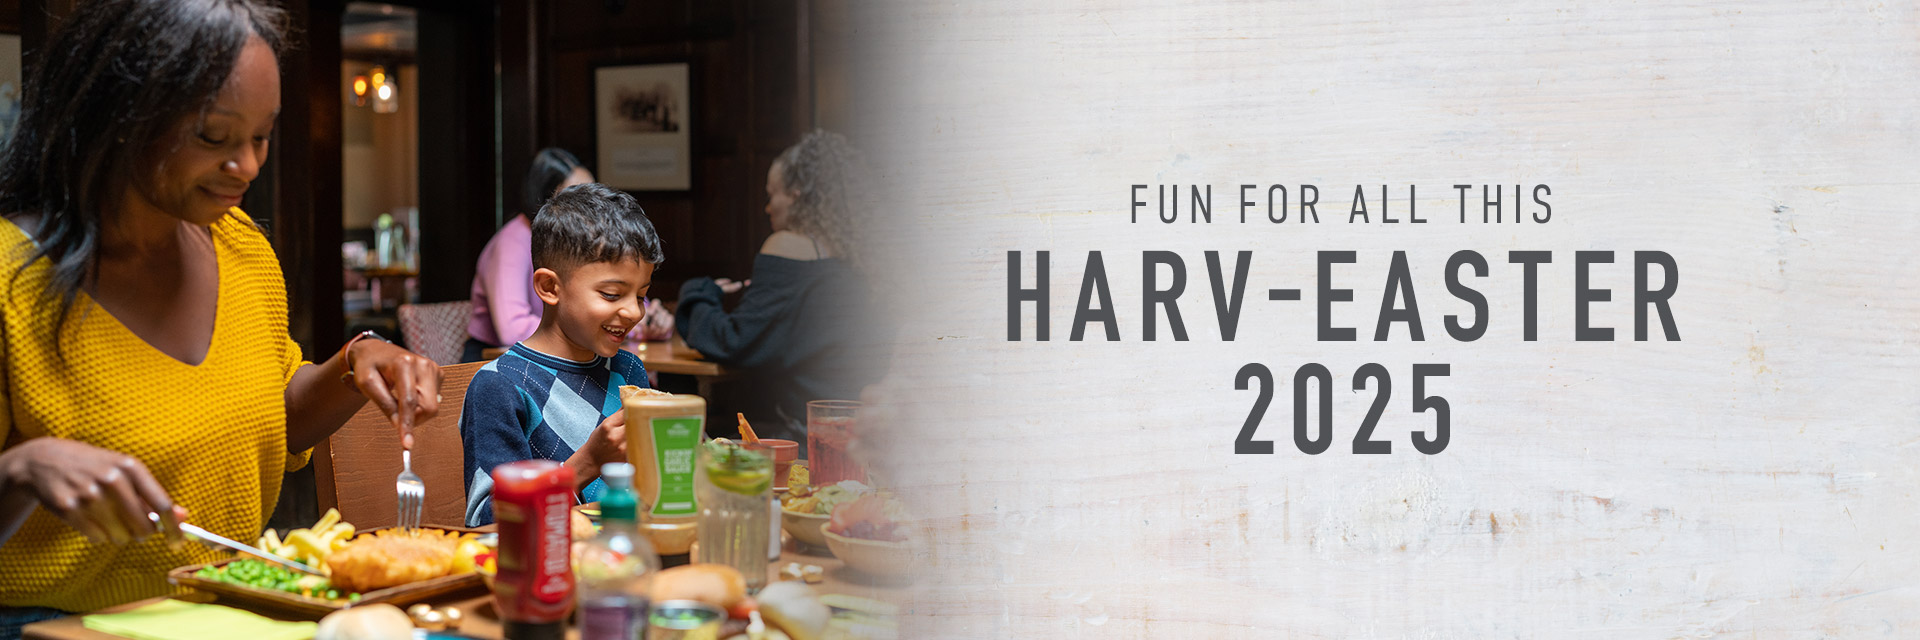 Easter at Harvester Chesterfield in Chesterfield 2025